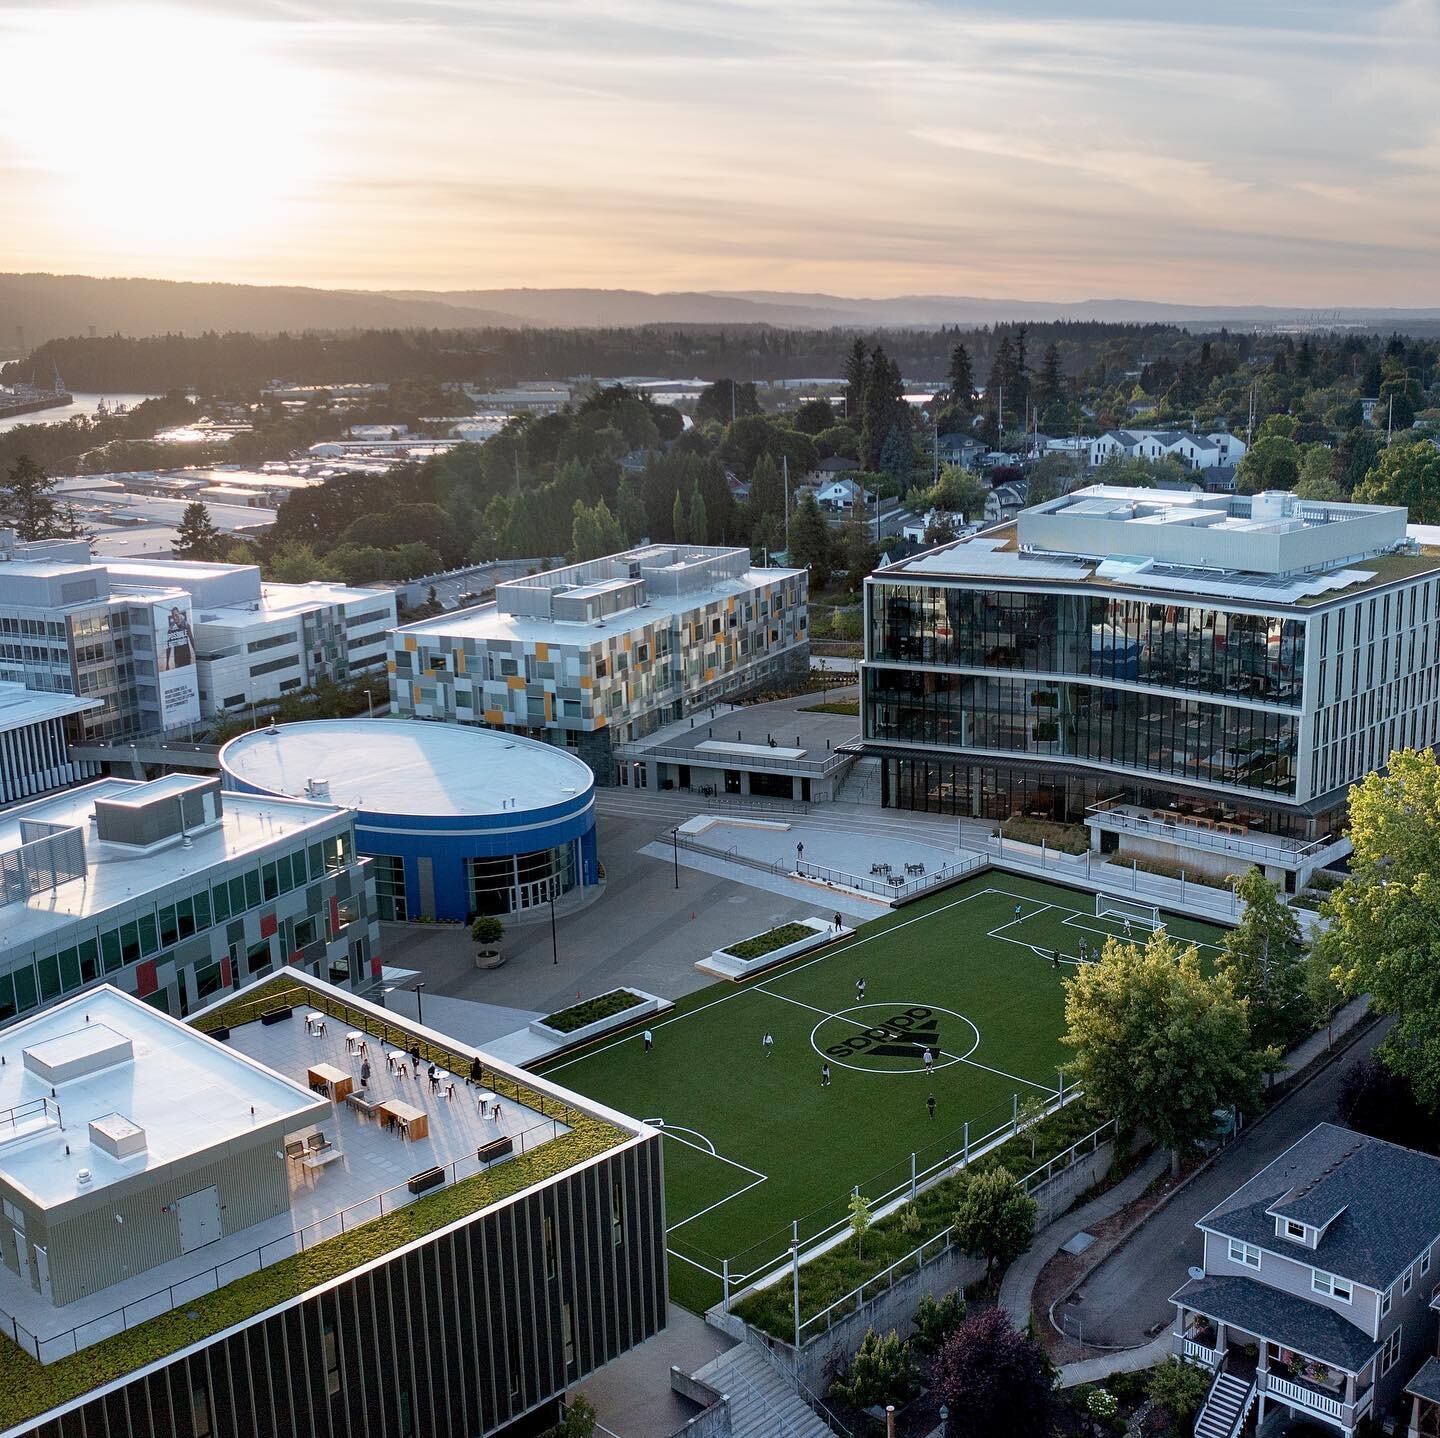 The recent expansion of the @adidas campus in Portland, Oregon refreshes and reformats an existing campus and central athletic field, adding social &ldquo;porches&rdquo; and terraces to connect a new building by @leverarchitecture to the rest of the 